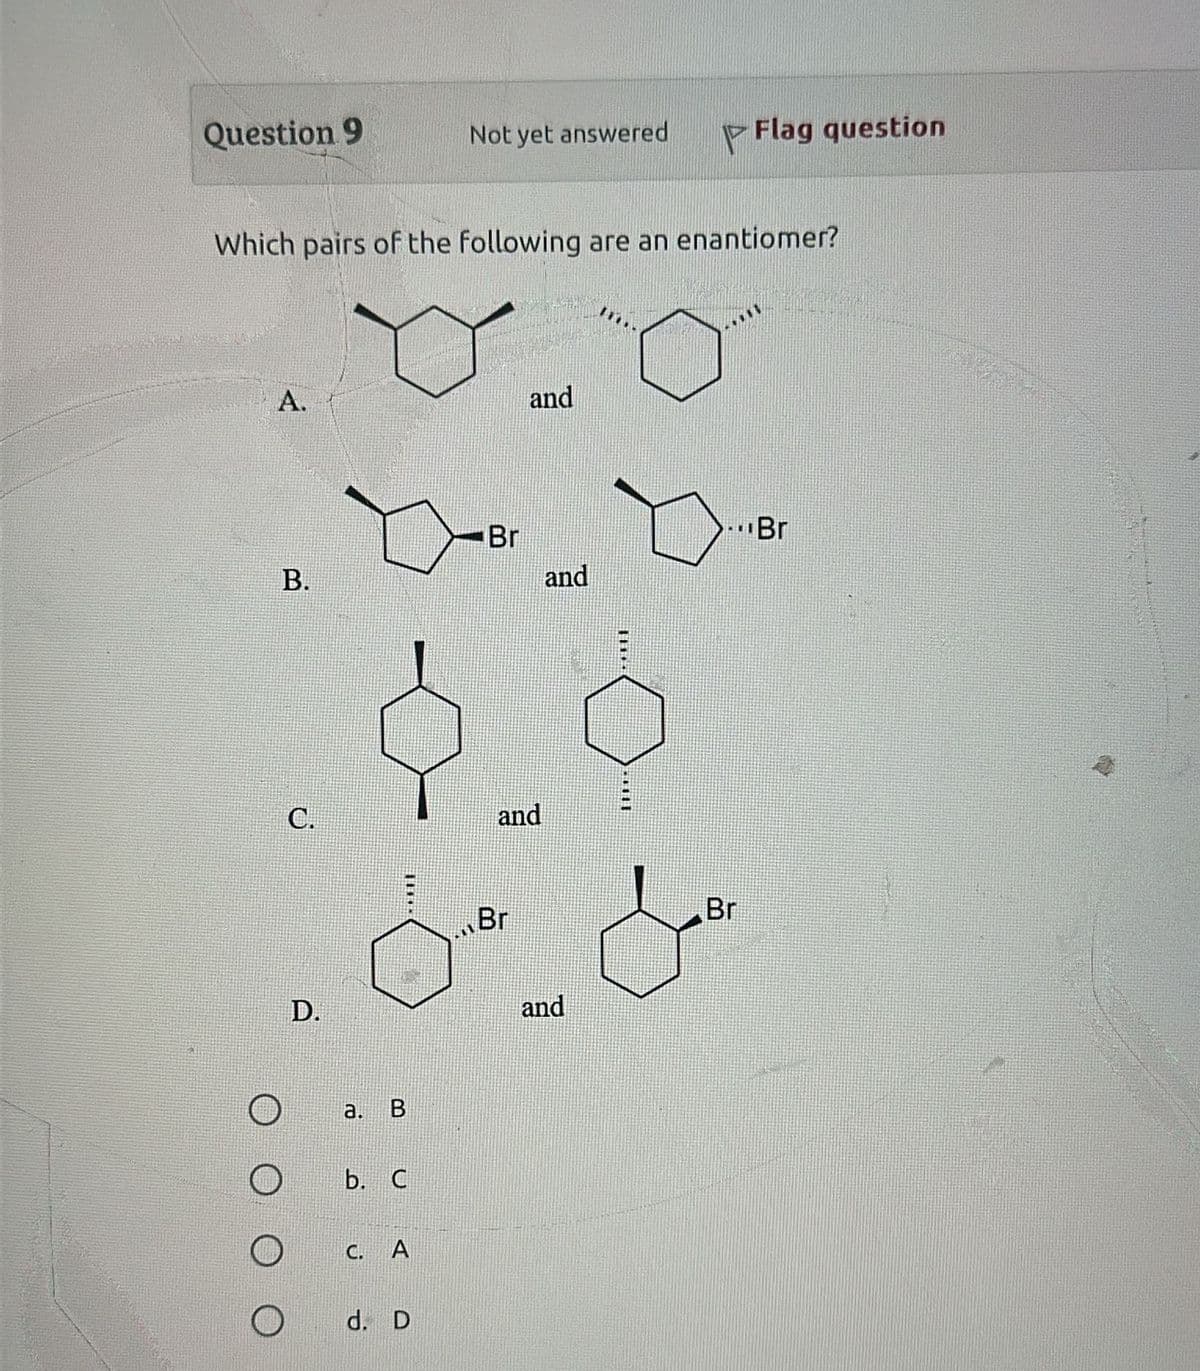 Question 9
Not yet answered
P
Flag question
Which pairs of the following are an enantiomer?
A.
and
B.
Br
C.
and
D.
a. B
b. C
C. A
O
d. D
Br
...Br
and
and
Br